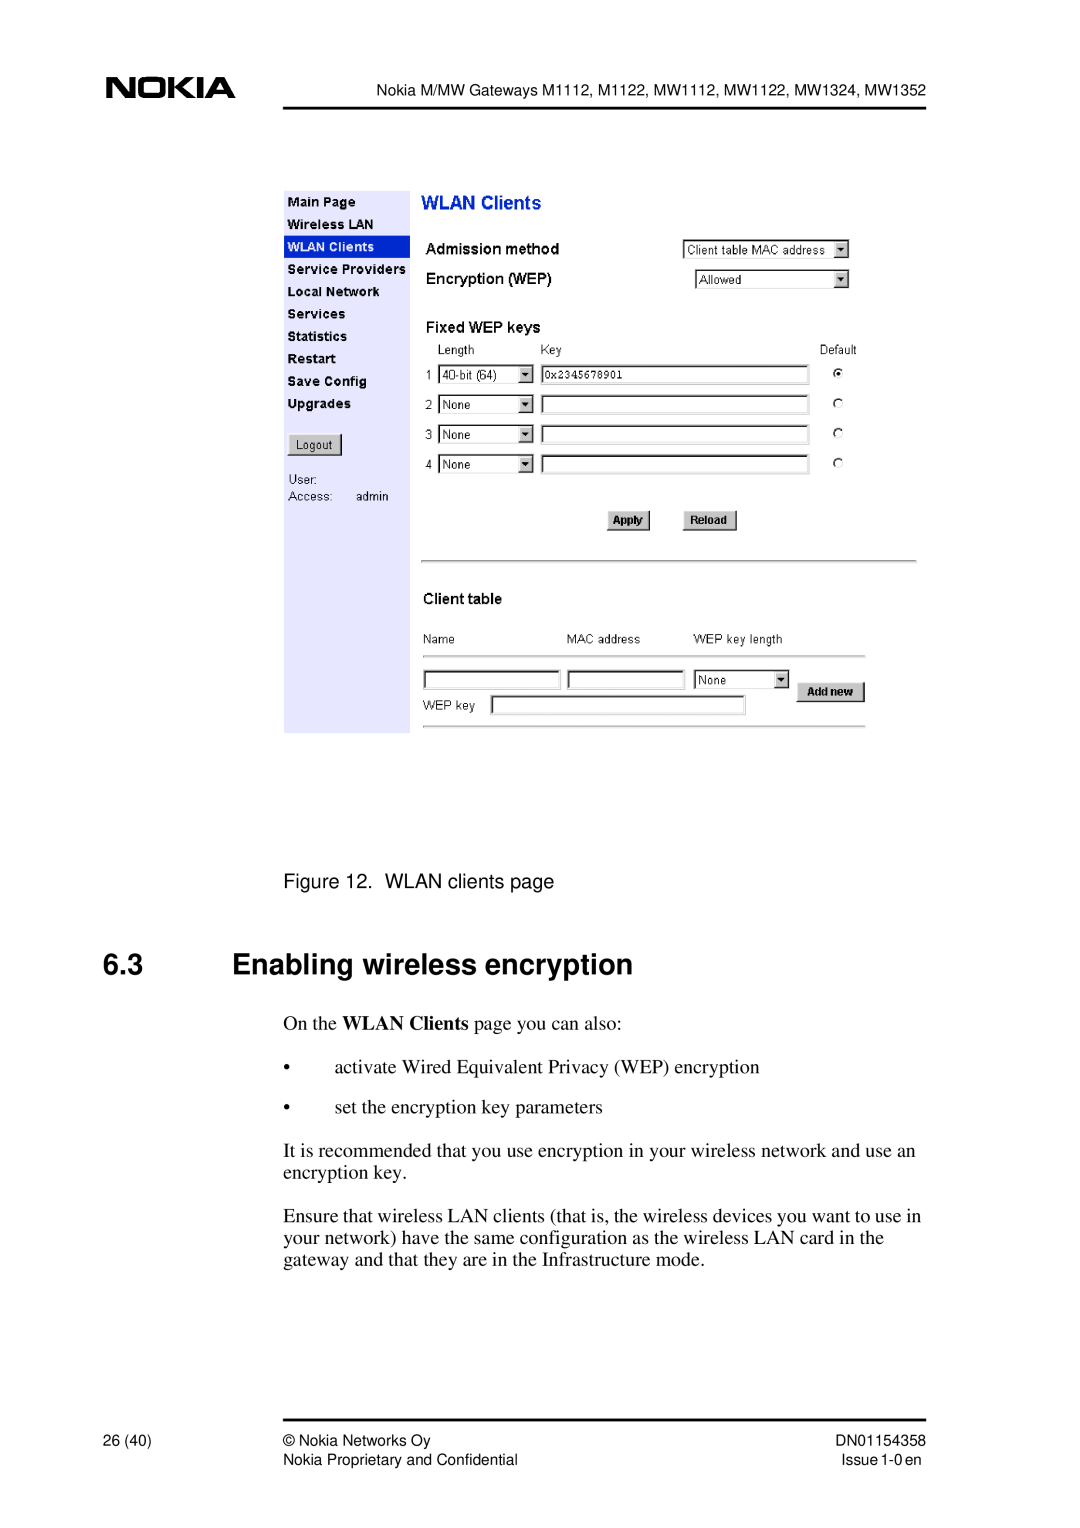 Nokia DSL Gateway High-Speed Internet Connection manual Enabling wireless encryption, WLAN clients page 